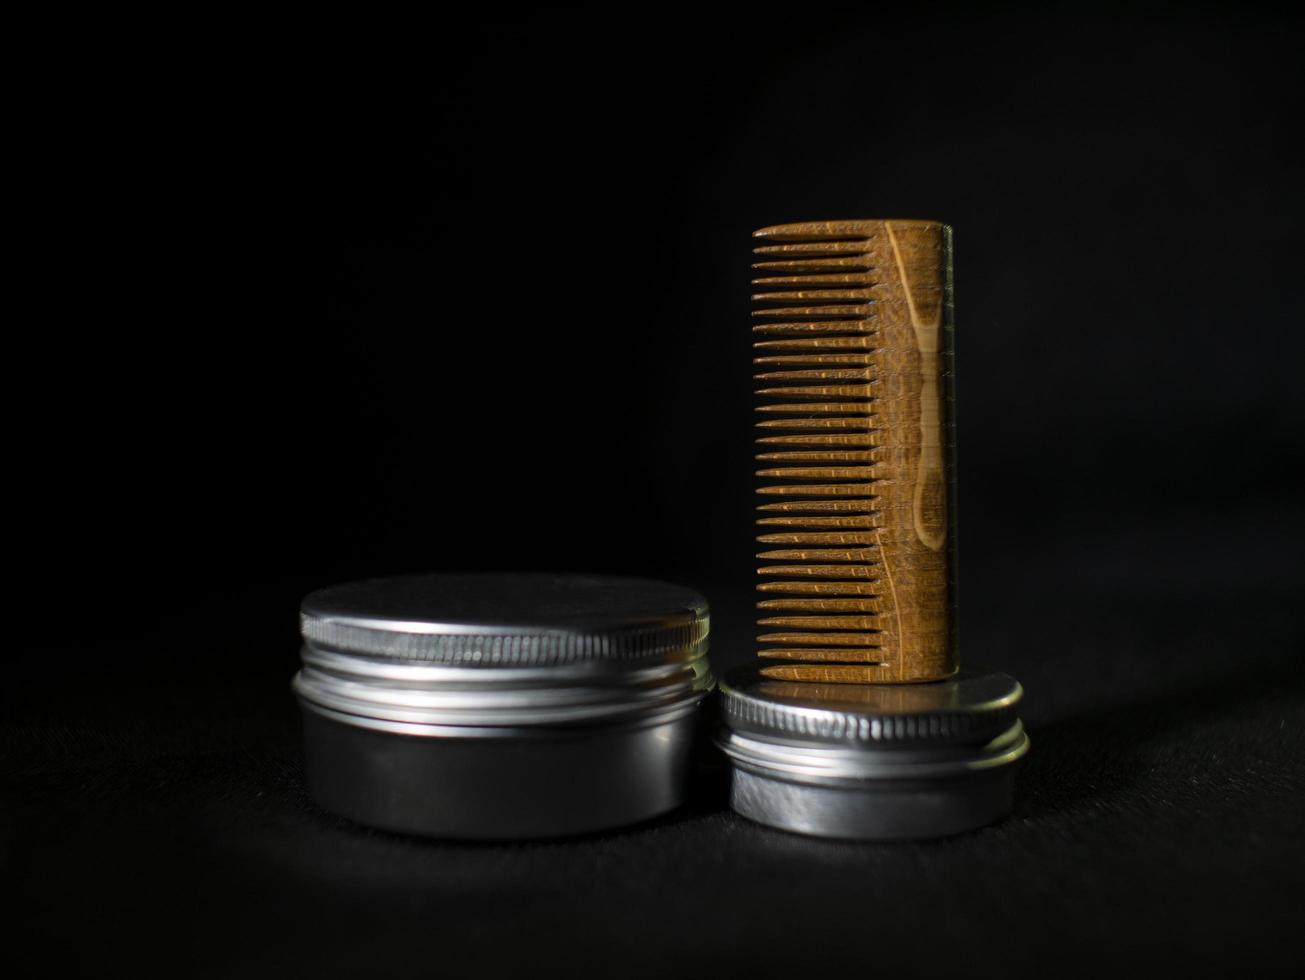 Wooden comb and jars of beard and mustache wax on a black background photo